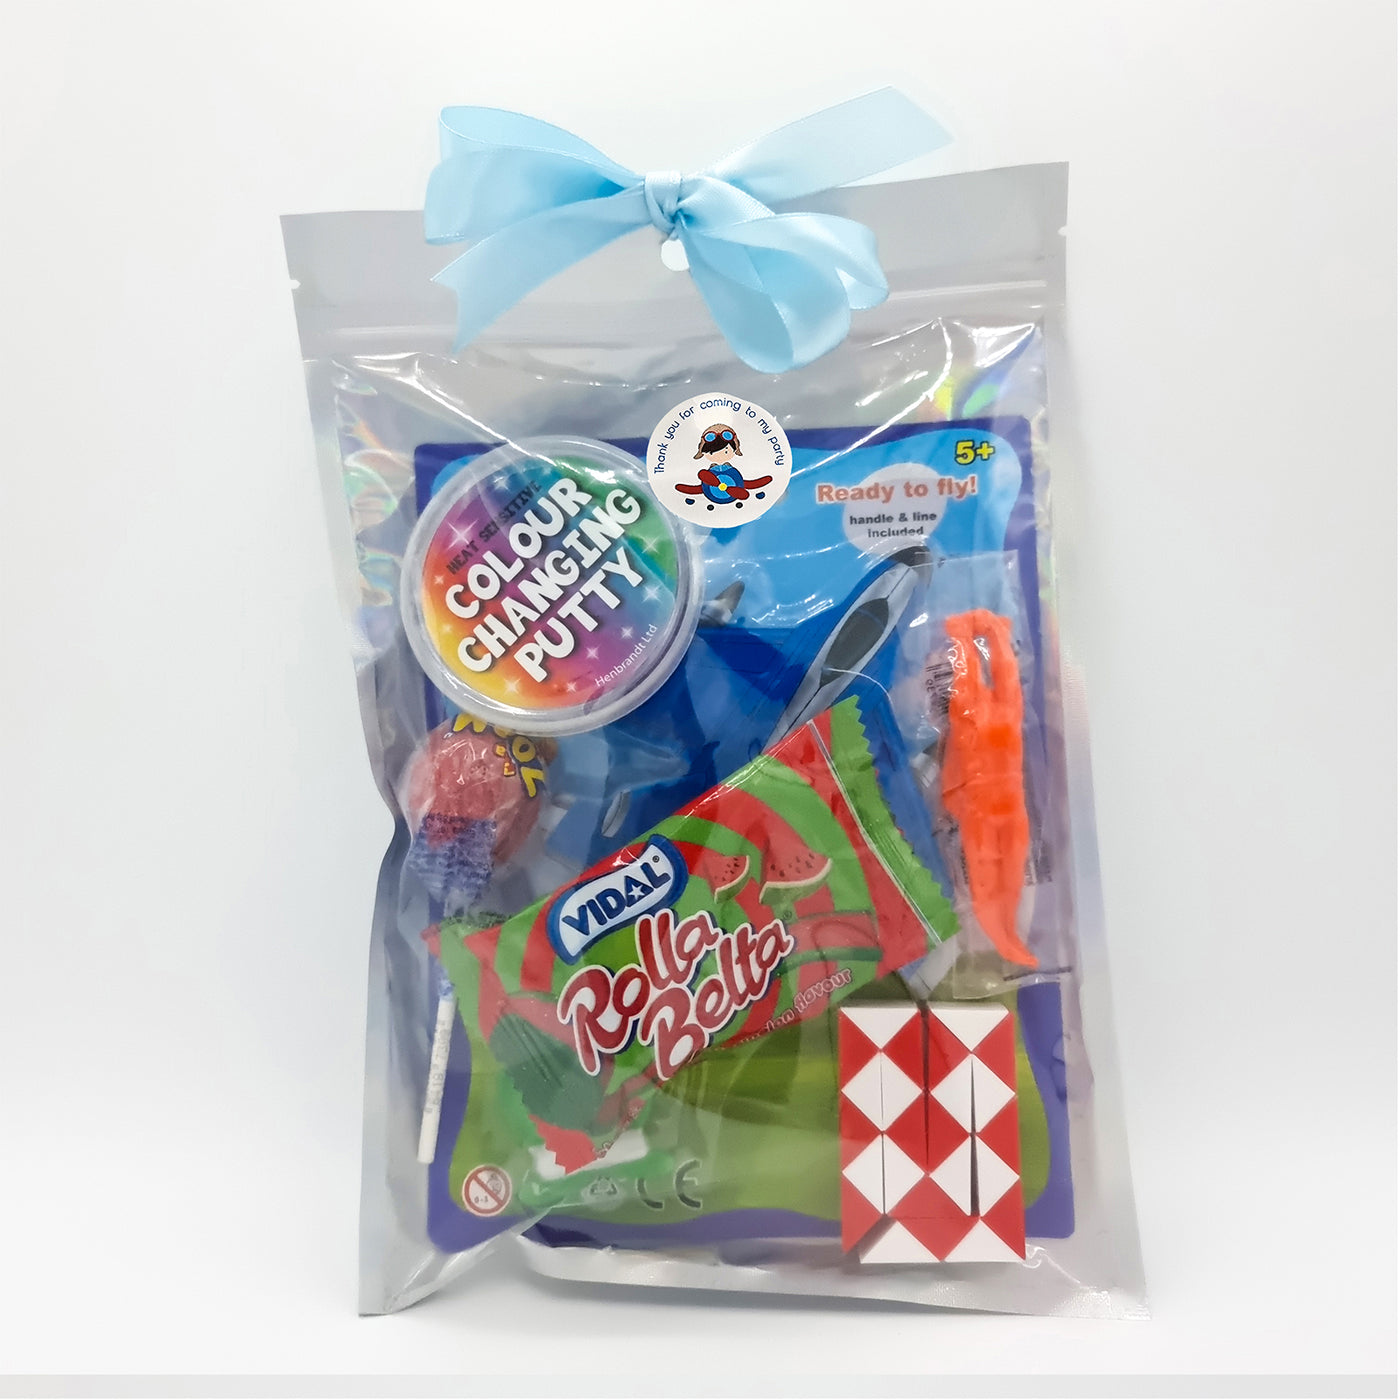 Boys Pre Filled Aeroplane Pilot Party Goody Bags Party Favours With Toys And Sweets.